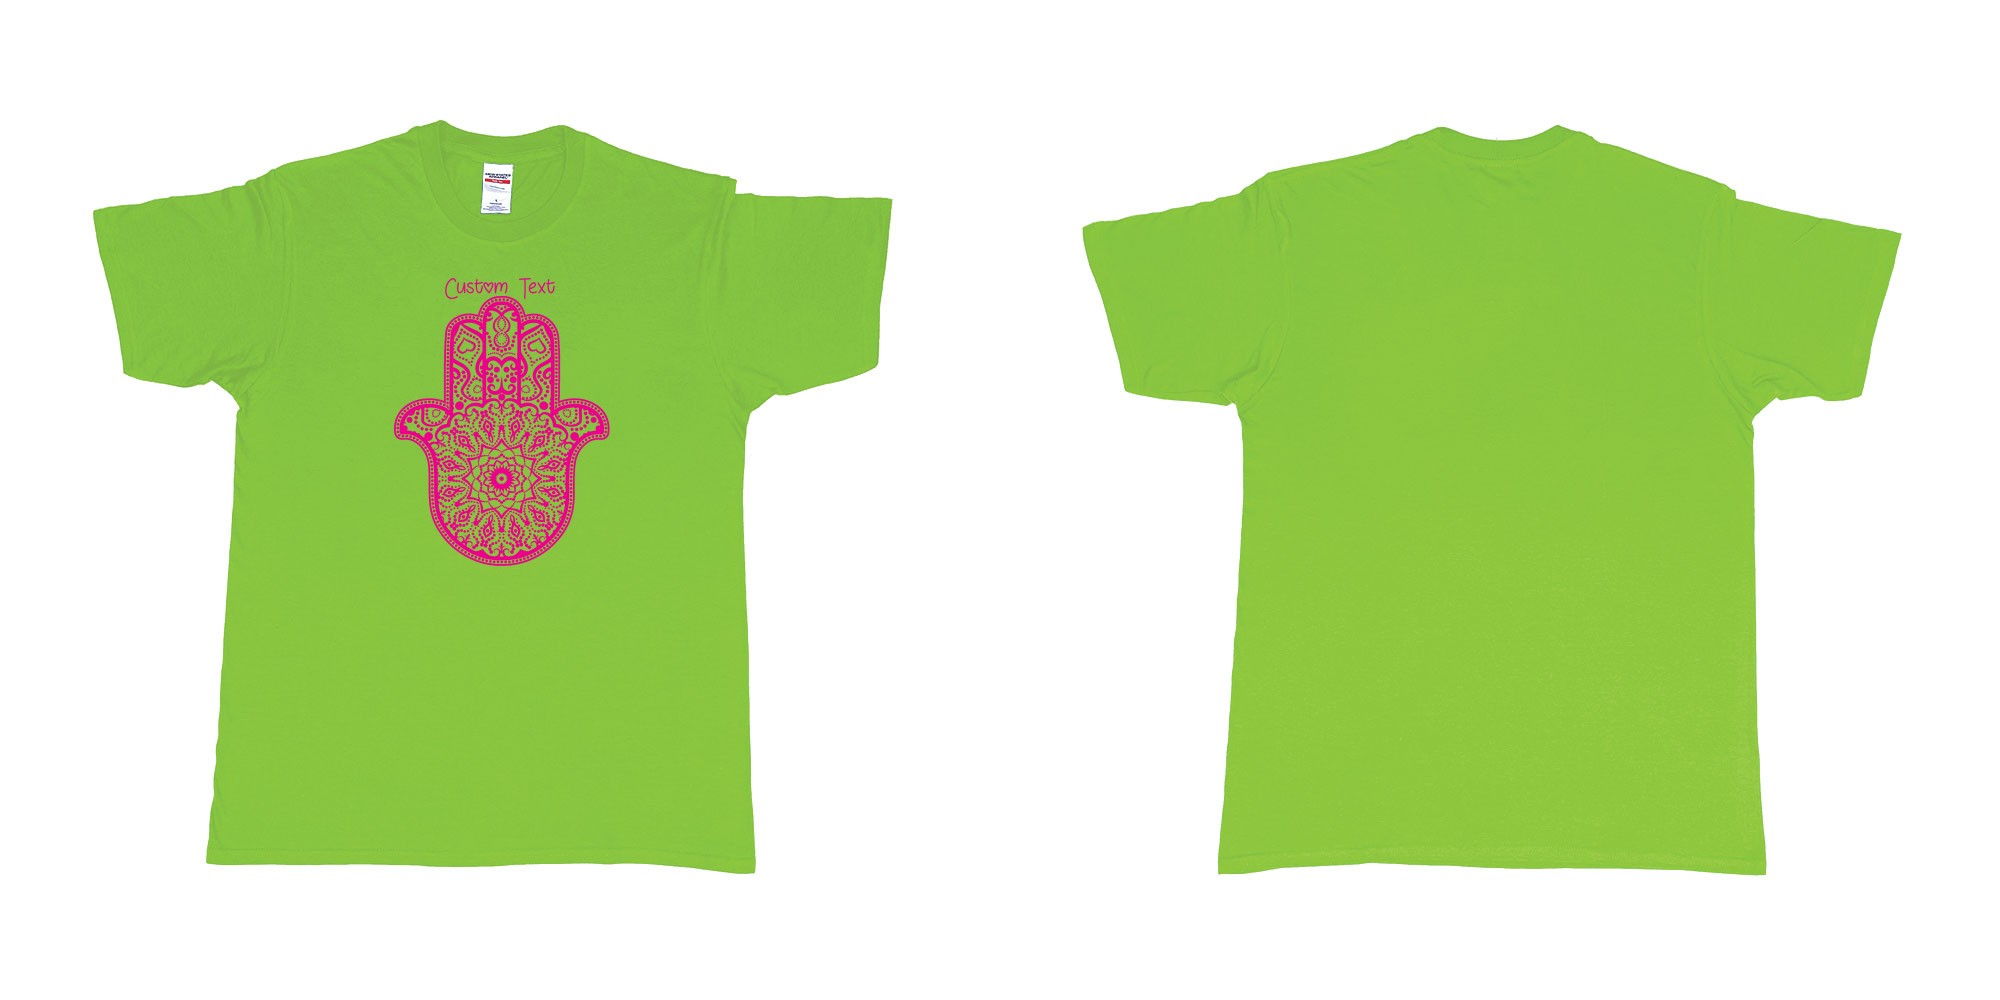 Custom tshirt design hamsa hand mandala custom text in fabric color lime choice your own text made in Bali by The Pirate Way